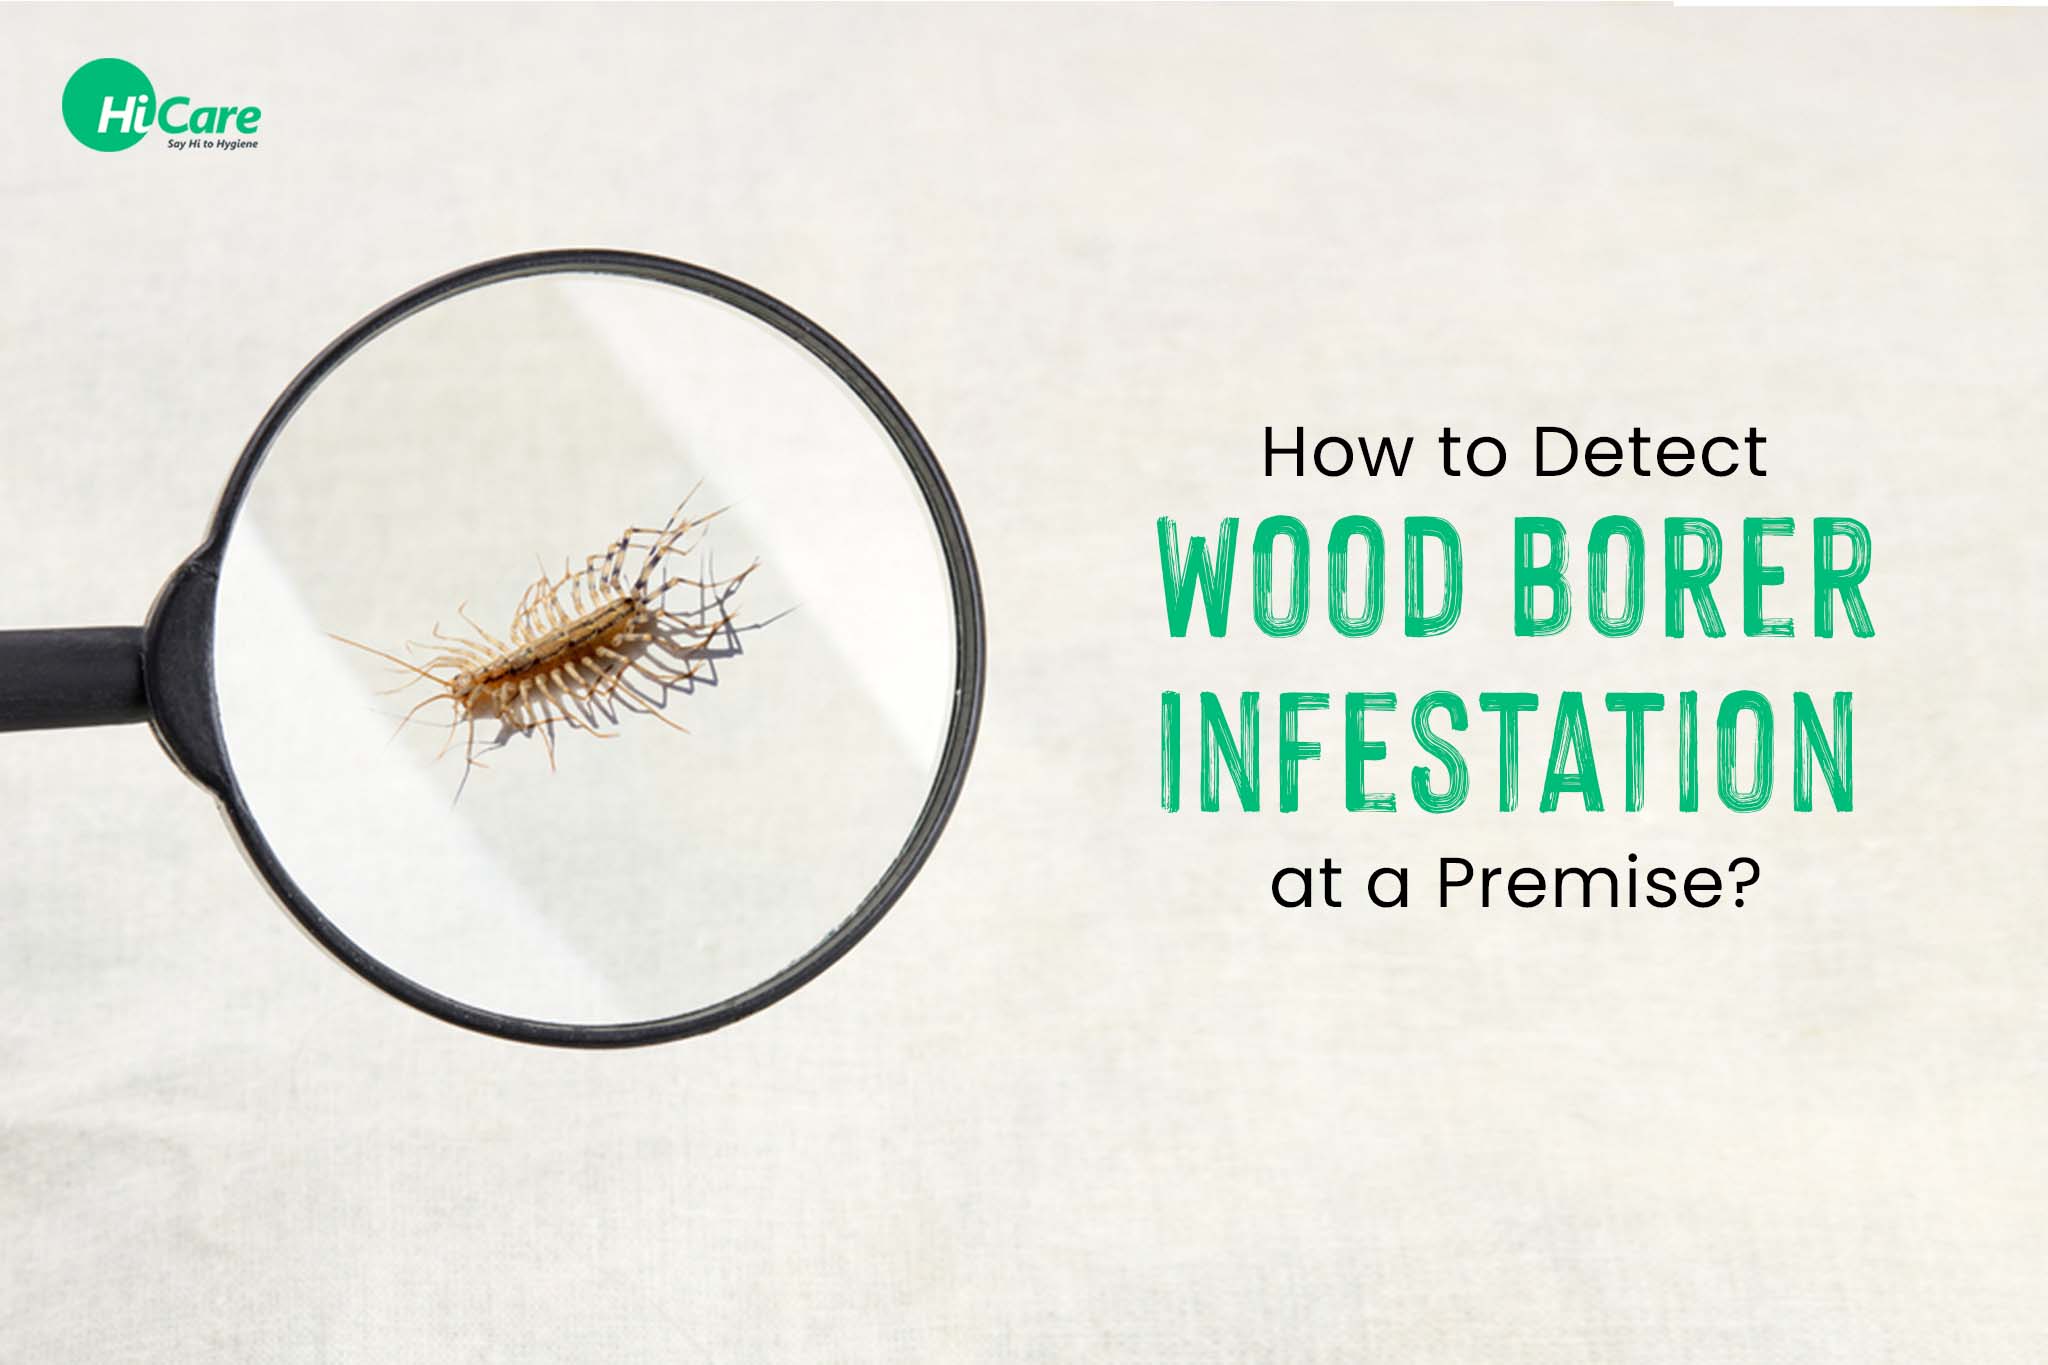 How to Detect Wood Borer Infestation at a Premise?